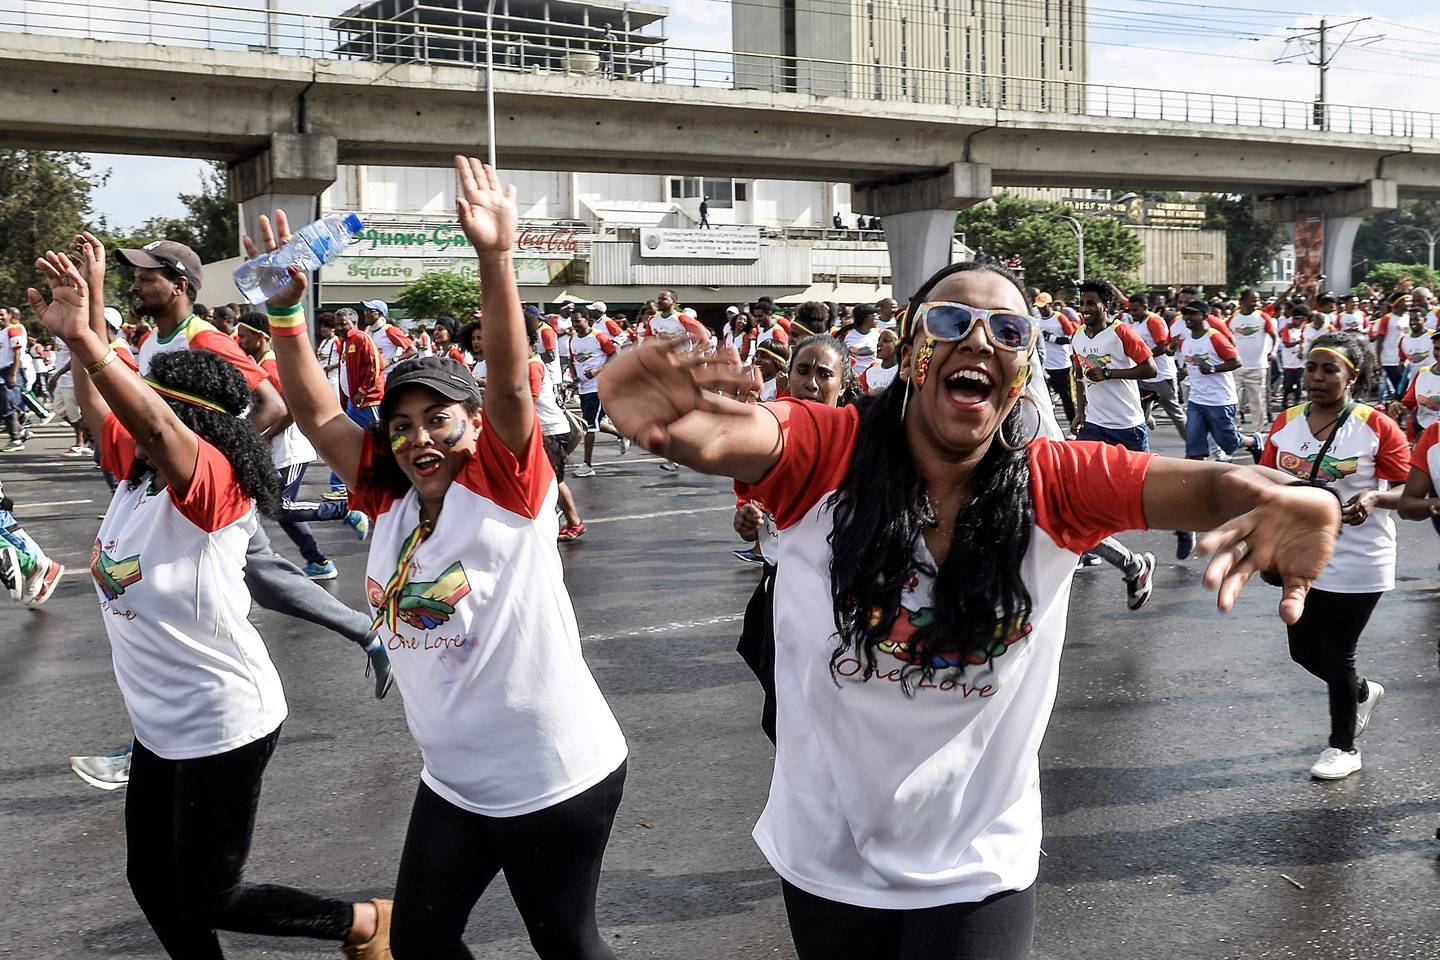 Competitors react as they run during the first Ethiopia-Eritrea Peace and reconciliation Run (10km) in Addis Ababa on November 11, 2018. - Thousands of Ethiopians and Eritreans have taken part in a 10-kilometre reconciliation run, the first joint sporting event since the former bitter foes launched a rapid diplomatic thaw in July. The peace race through the Ethiopian capital caught the new positive mood after years of "cold war". The two countries fought a war from 1998-2000 that left an estimated 80,000 people dead on both sides. (Photo by Michael TEWELDE / AFP)